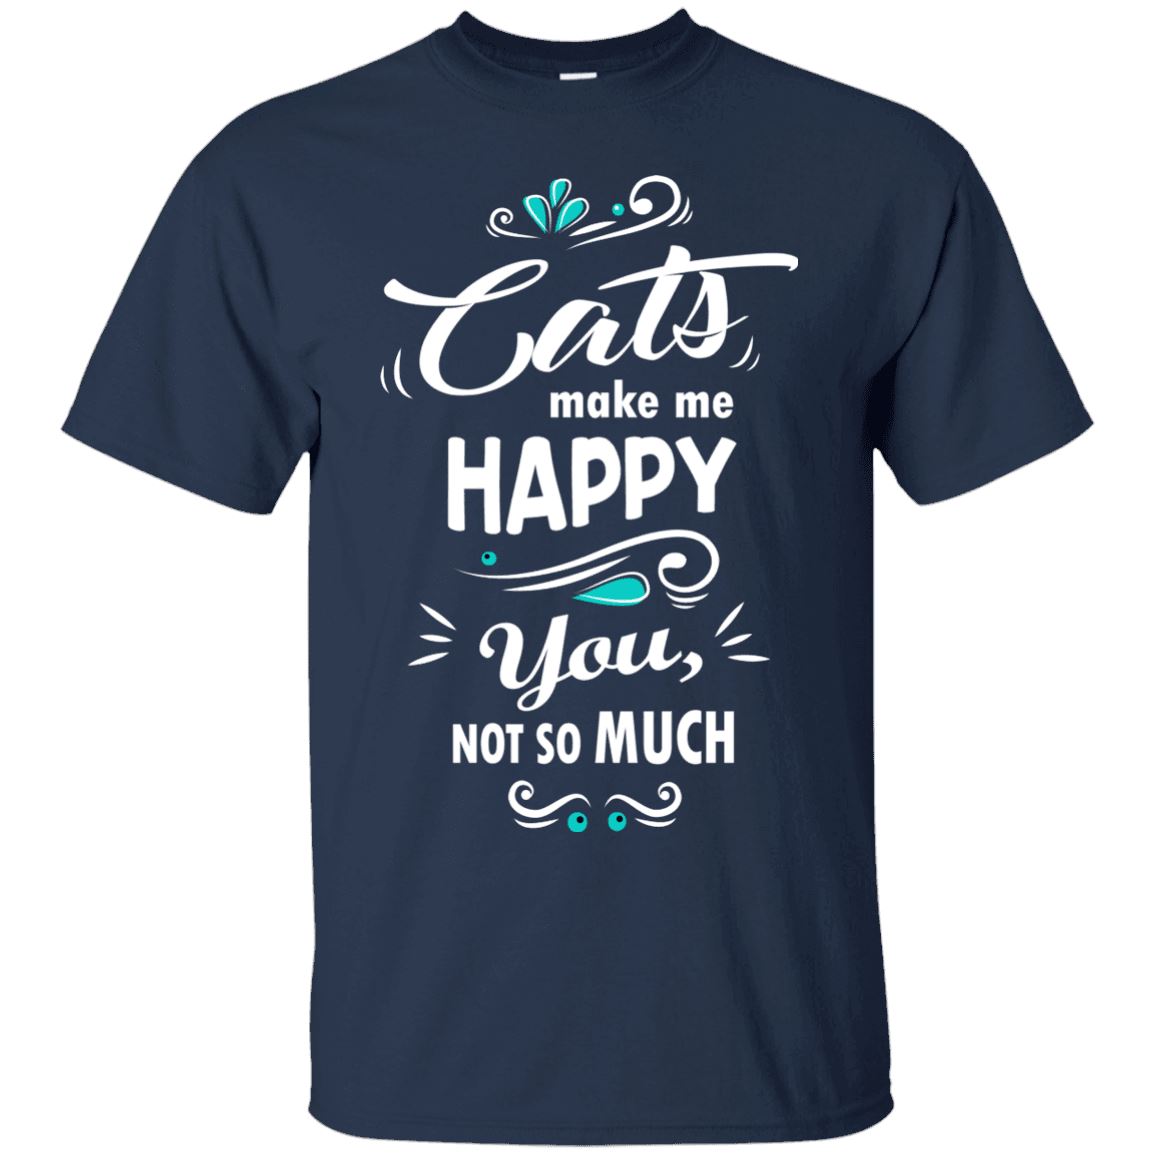 Cats Make Me Happy, You Not So Much - Cat Shirt